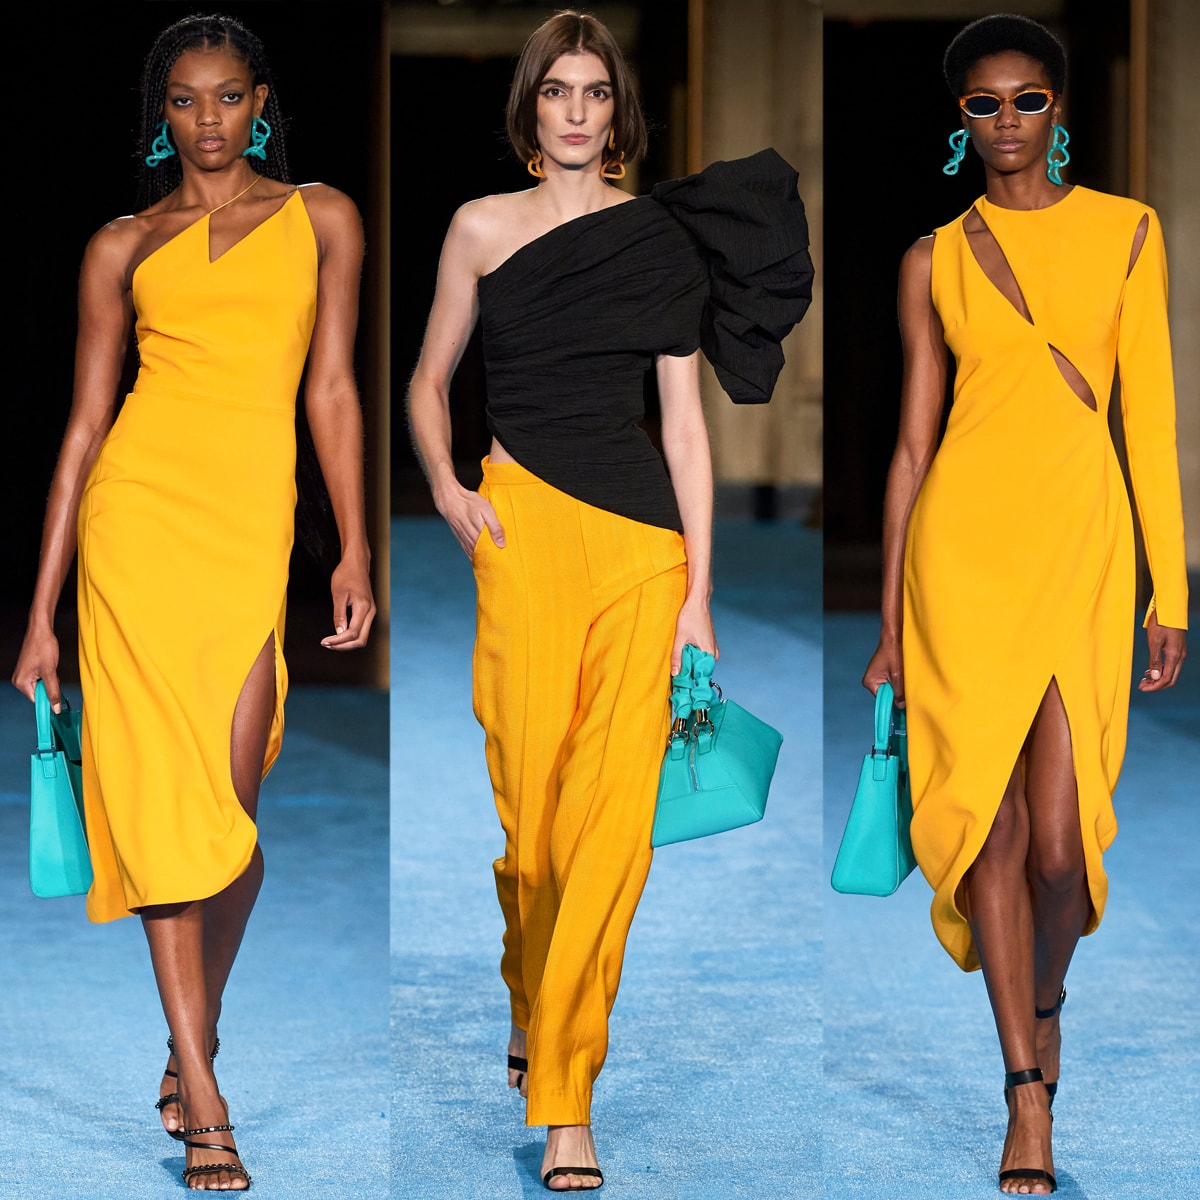 Color Blocking in Fashion 101: The Do’s and Don’ts of Wearing Colors